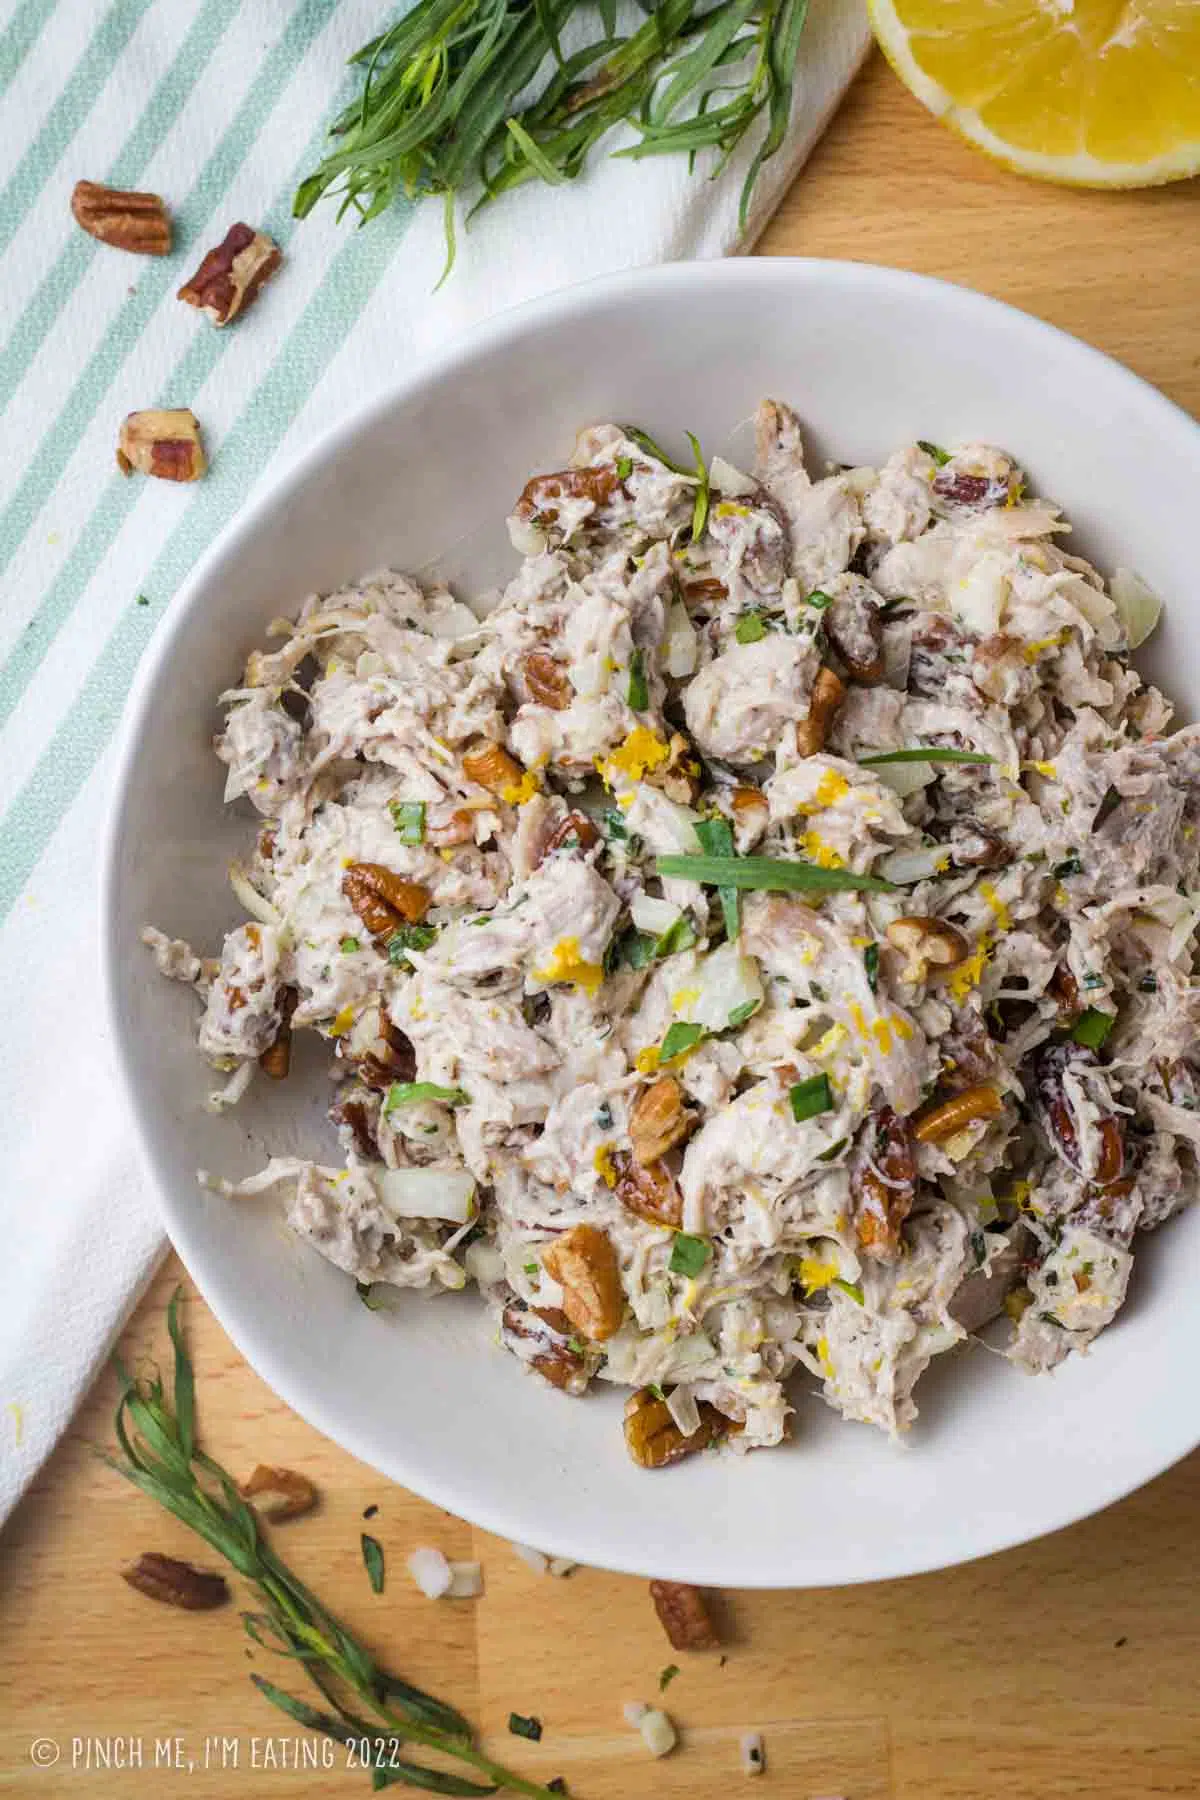 Lemon tarragon shredded chicken salad topped with pecans and lemon zest in a white bowl.